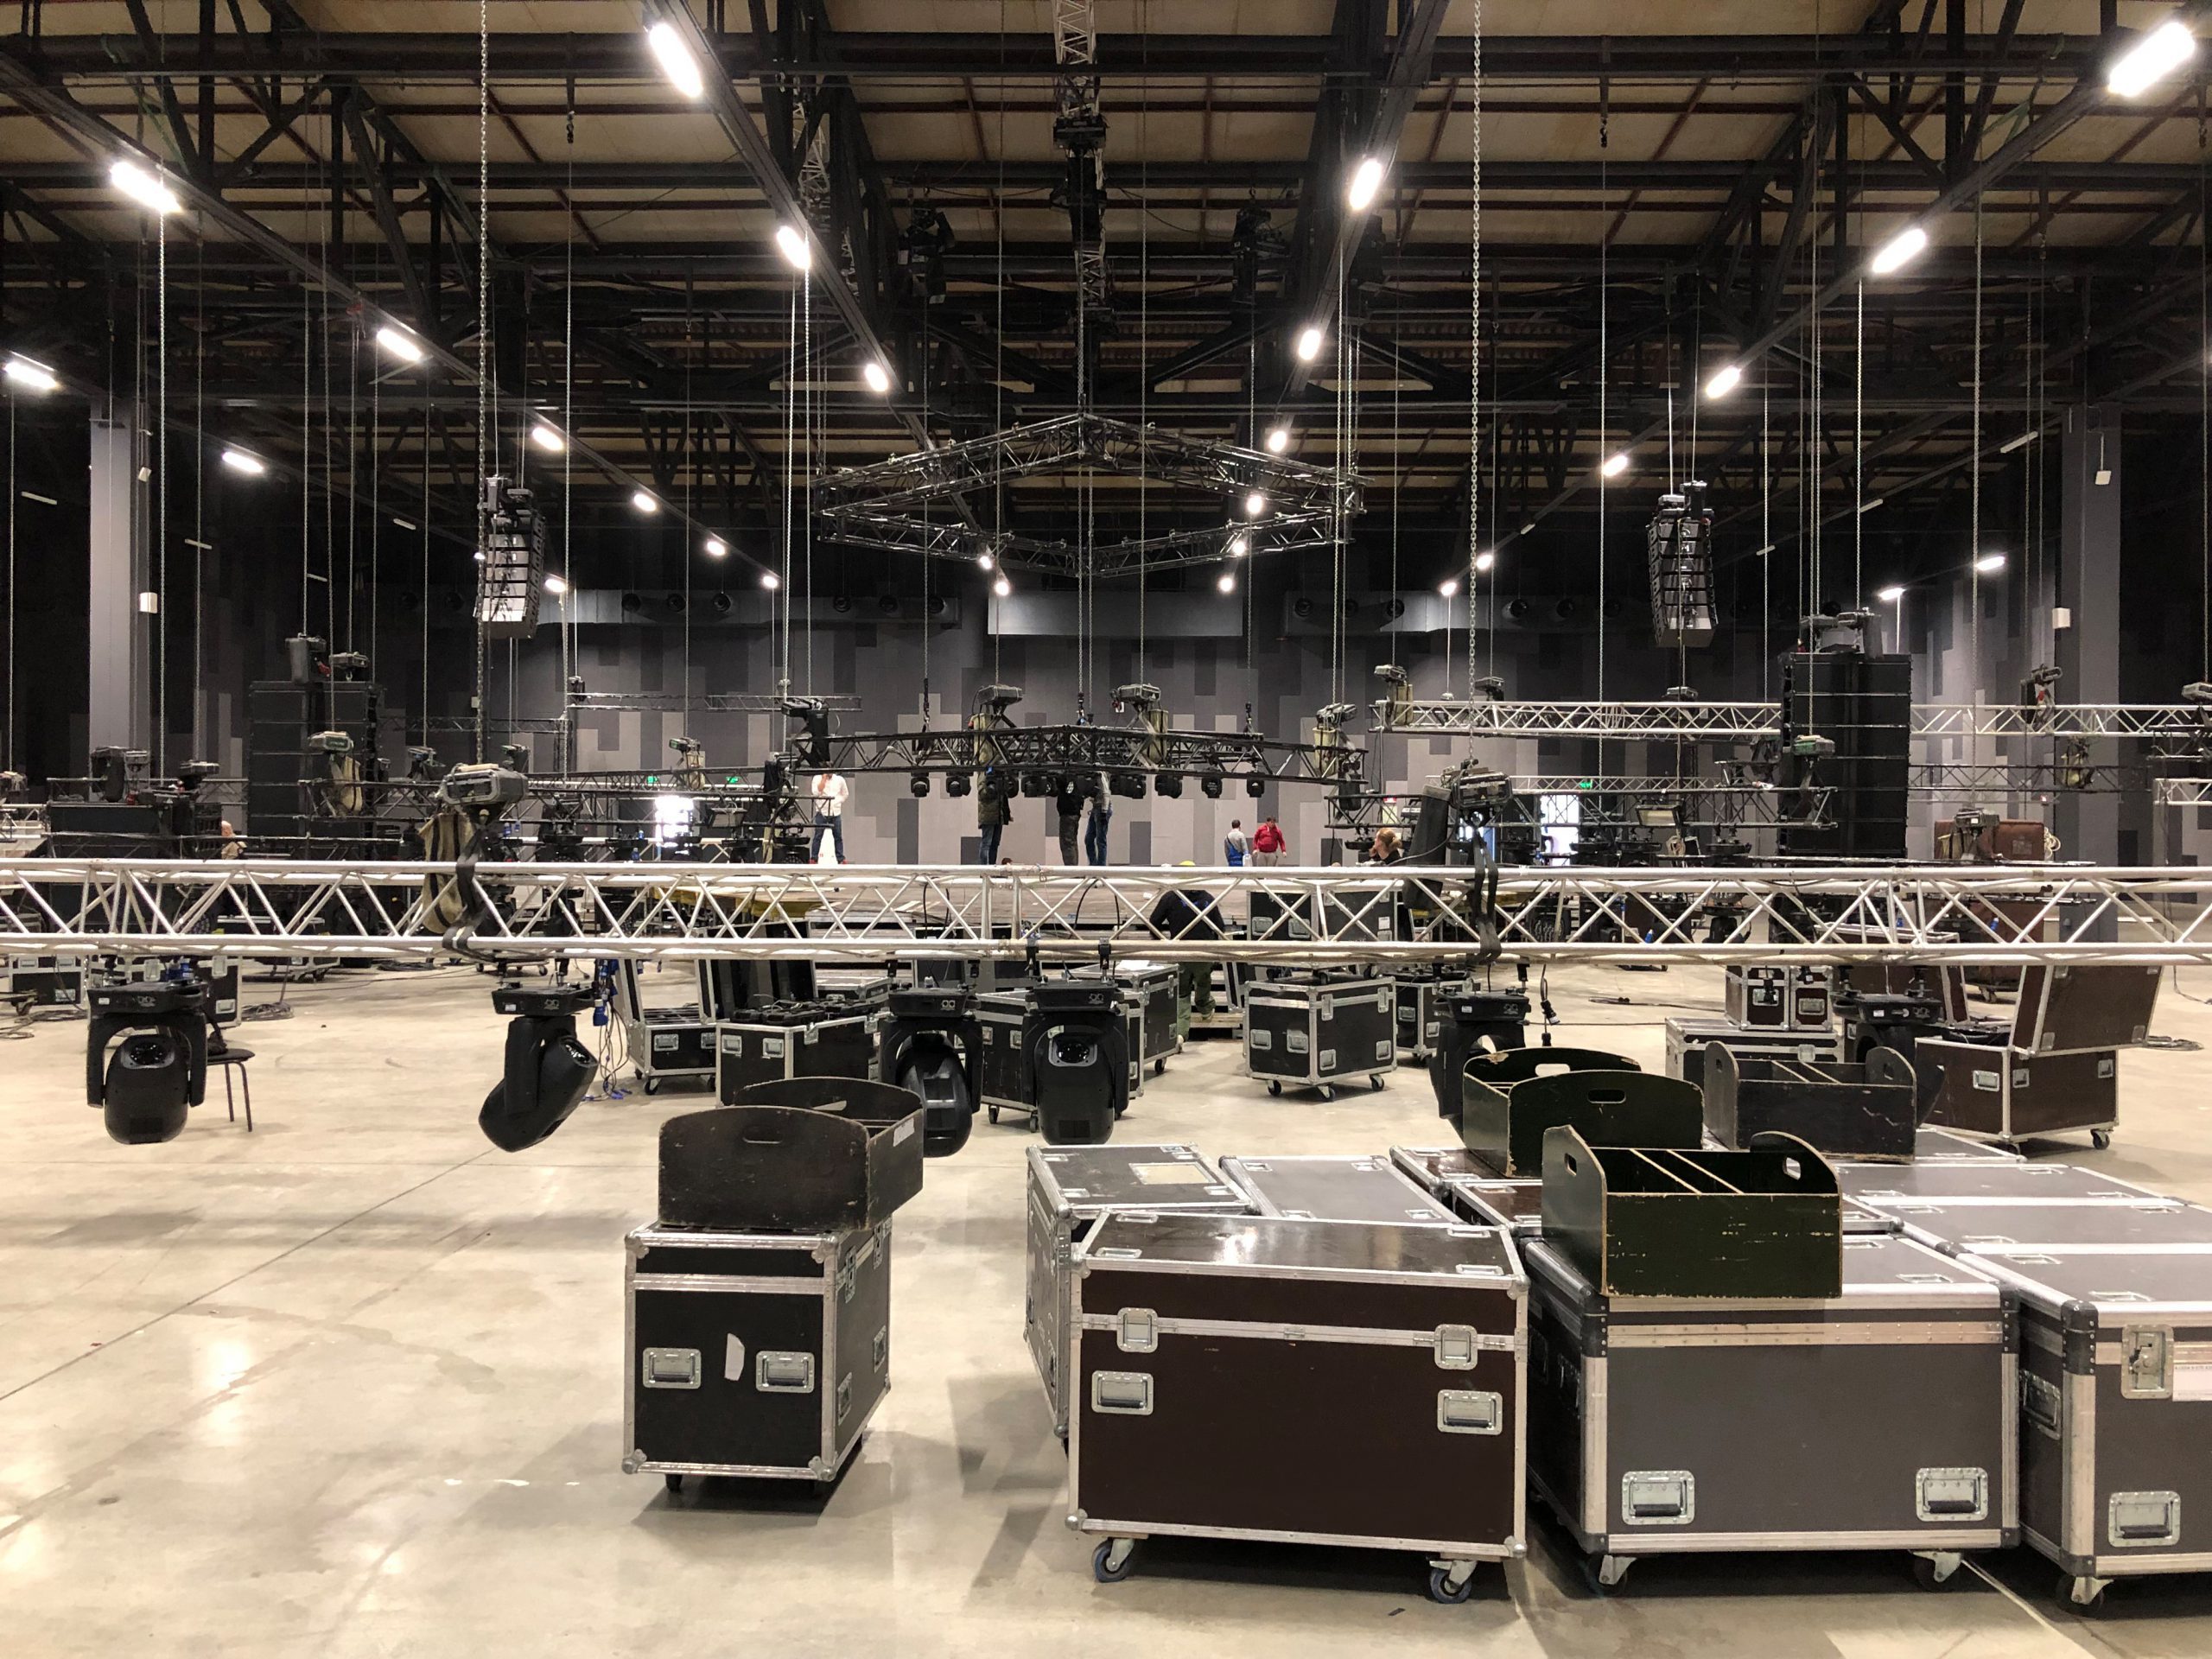 Sound equipment being installed in a large building